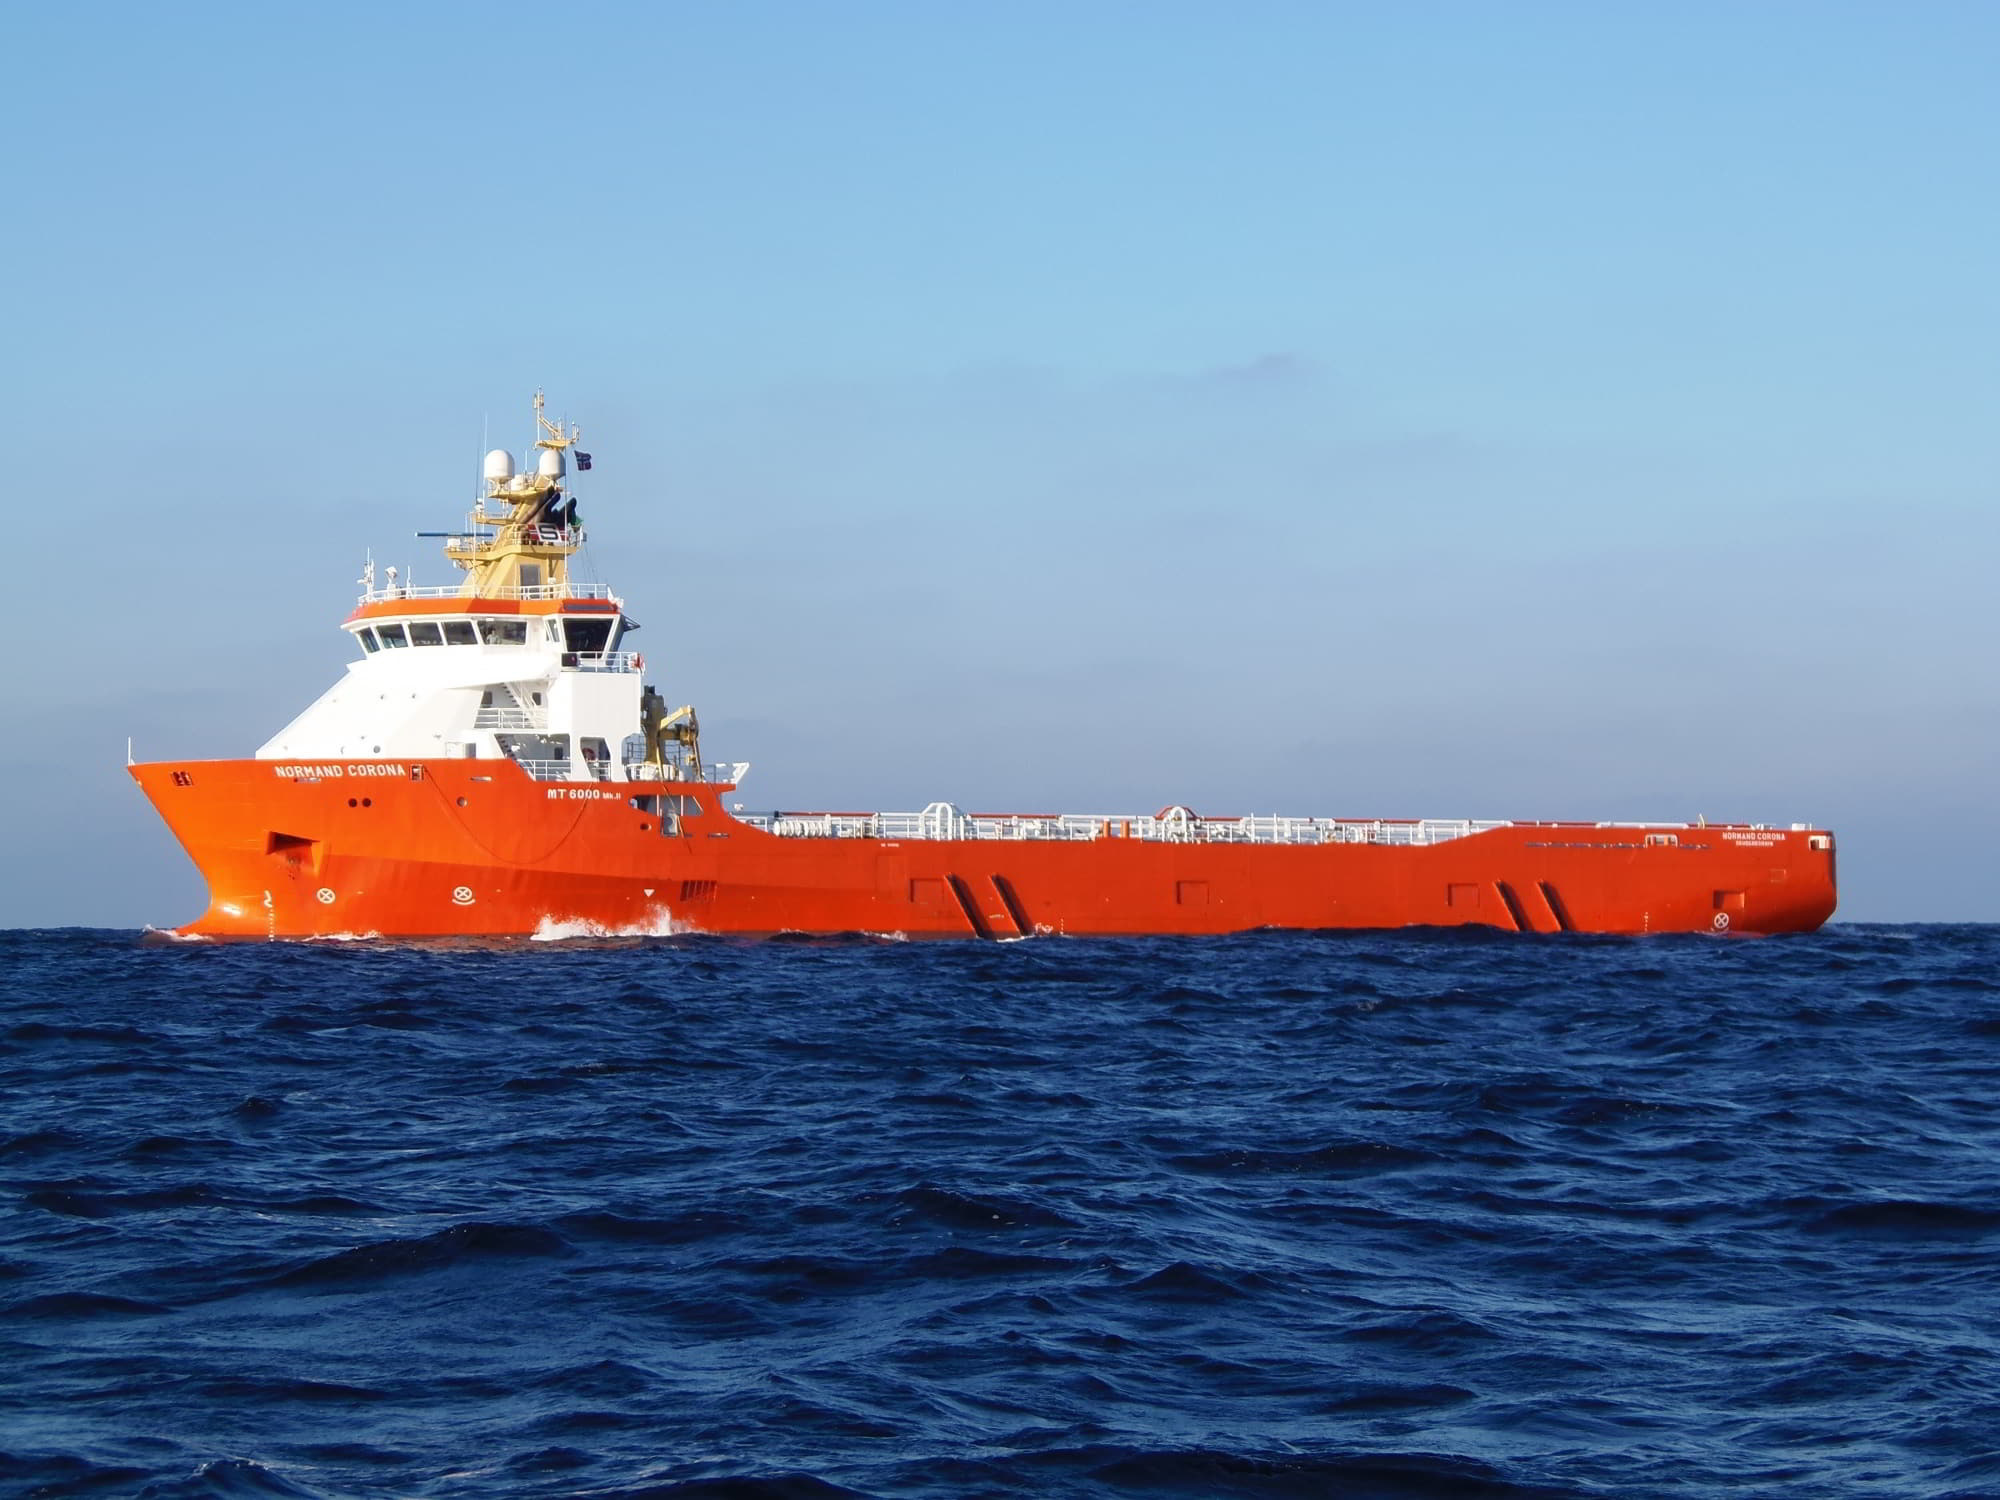 Solstad hands over another vessel to new owner